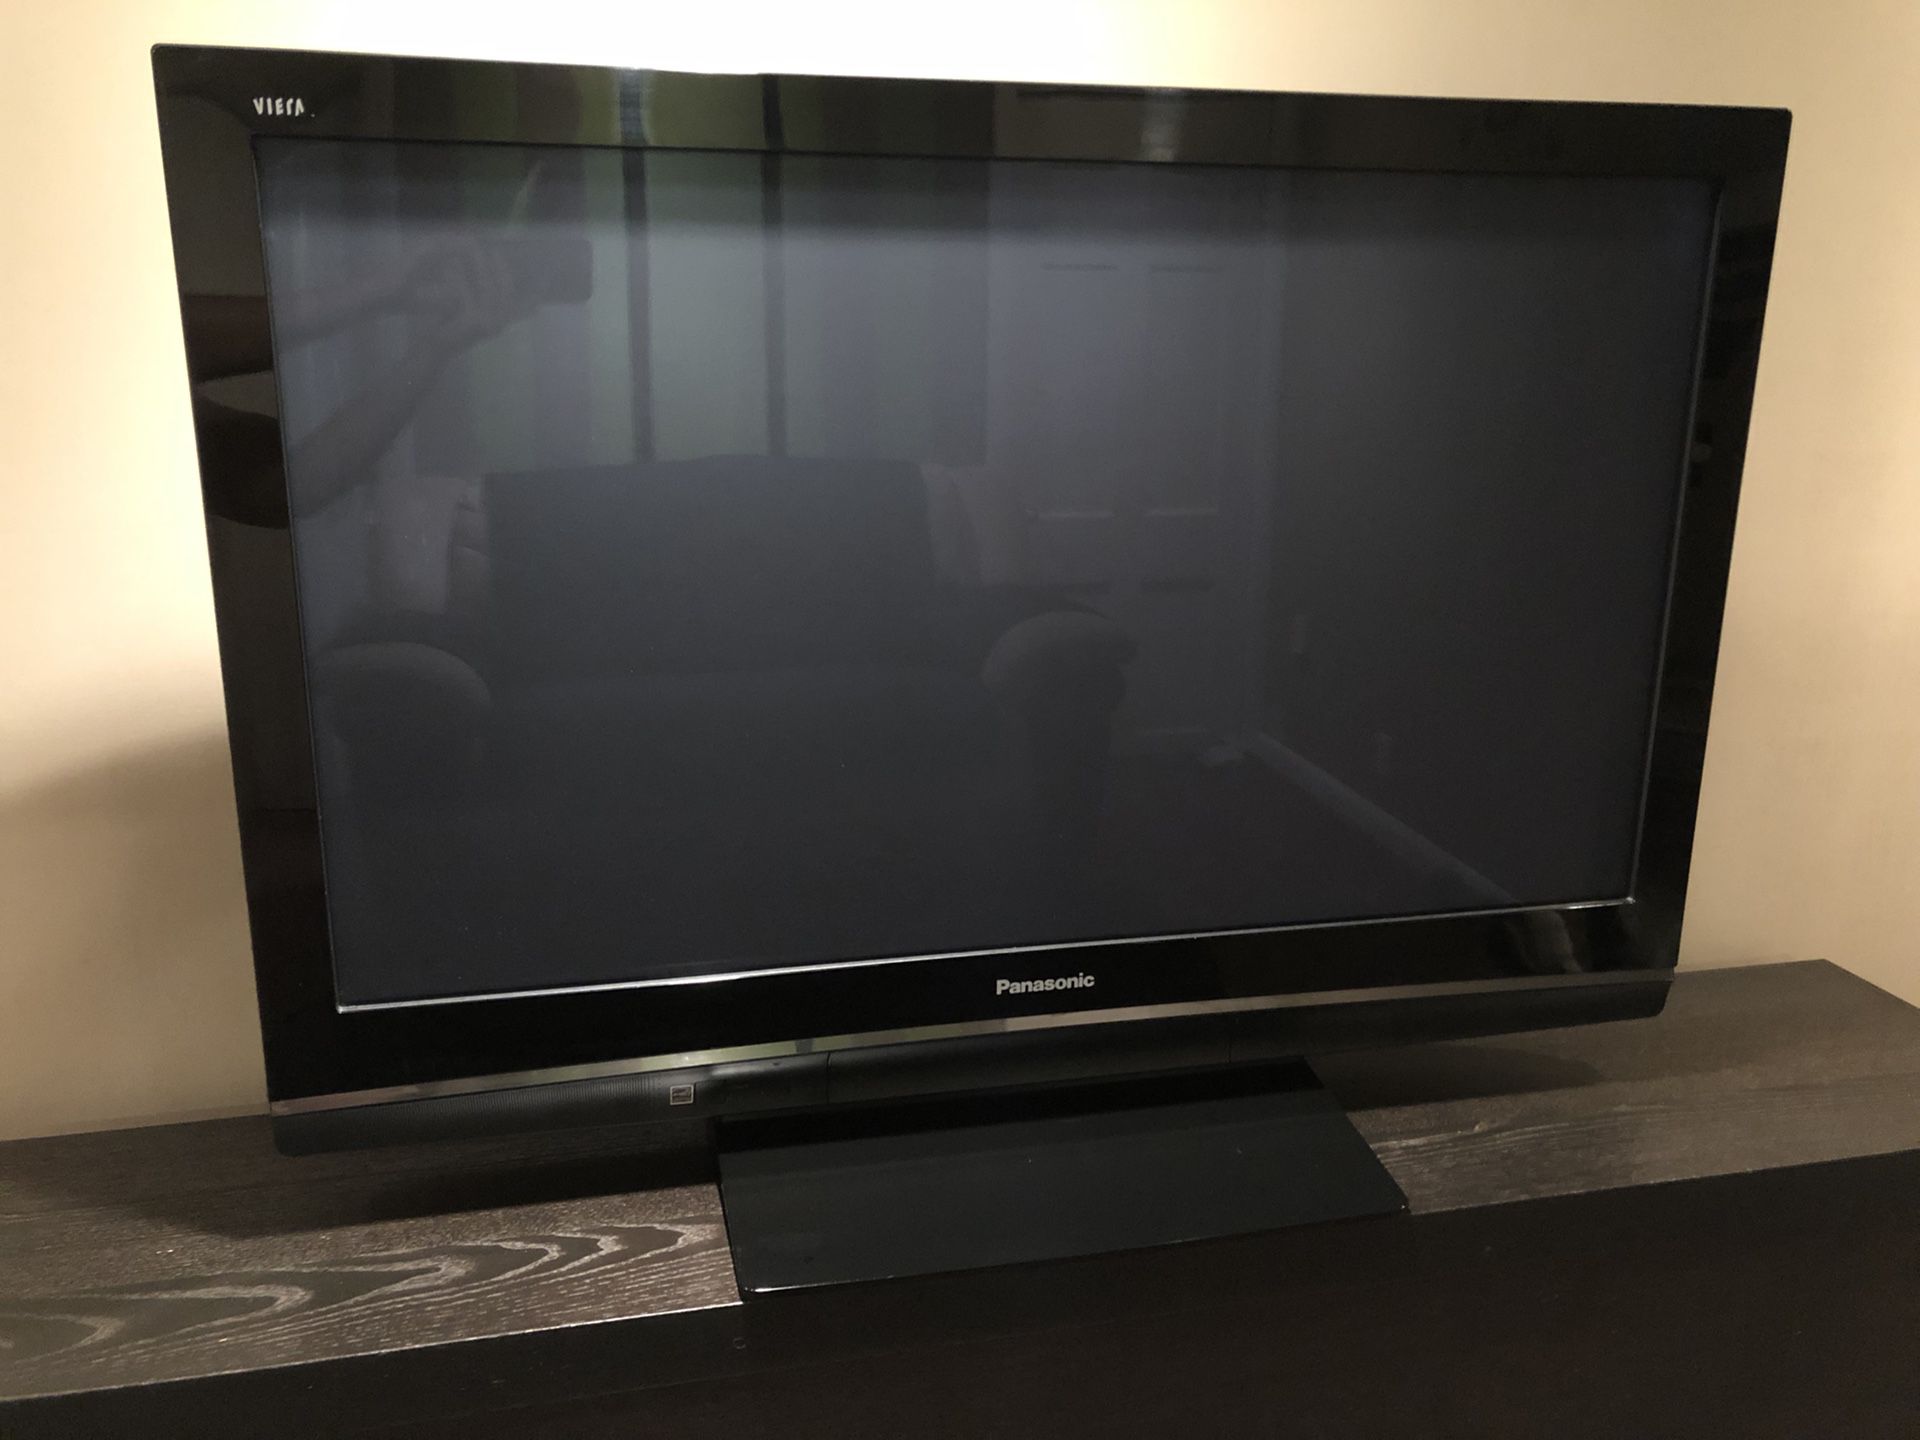 42” panasonic tv for sale or trade